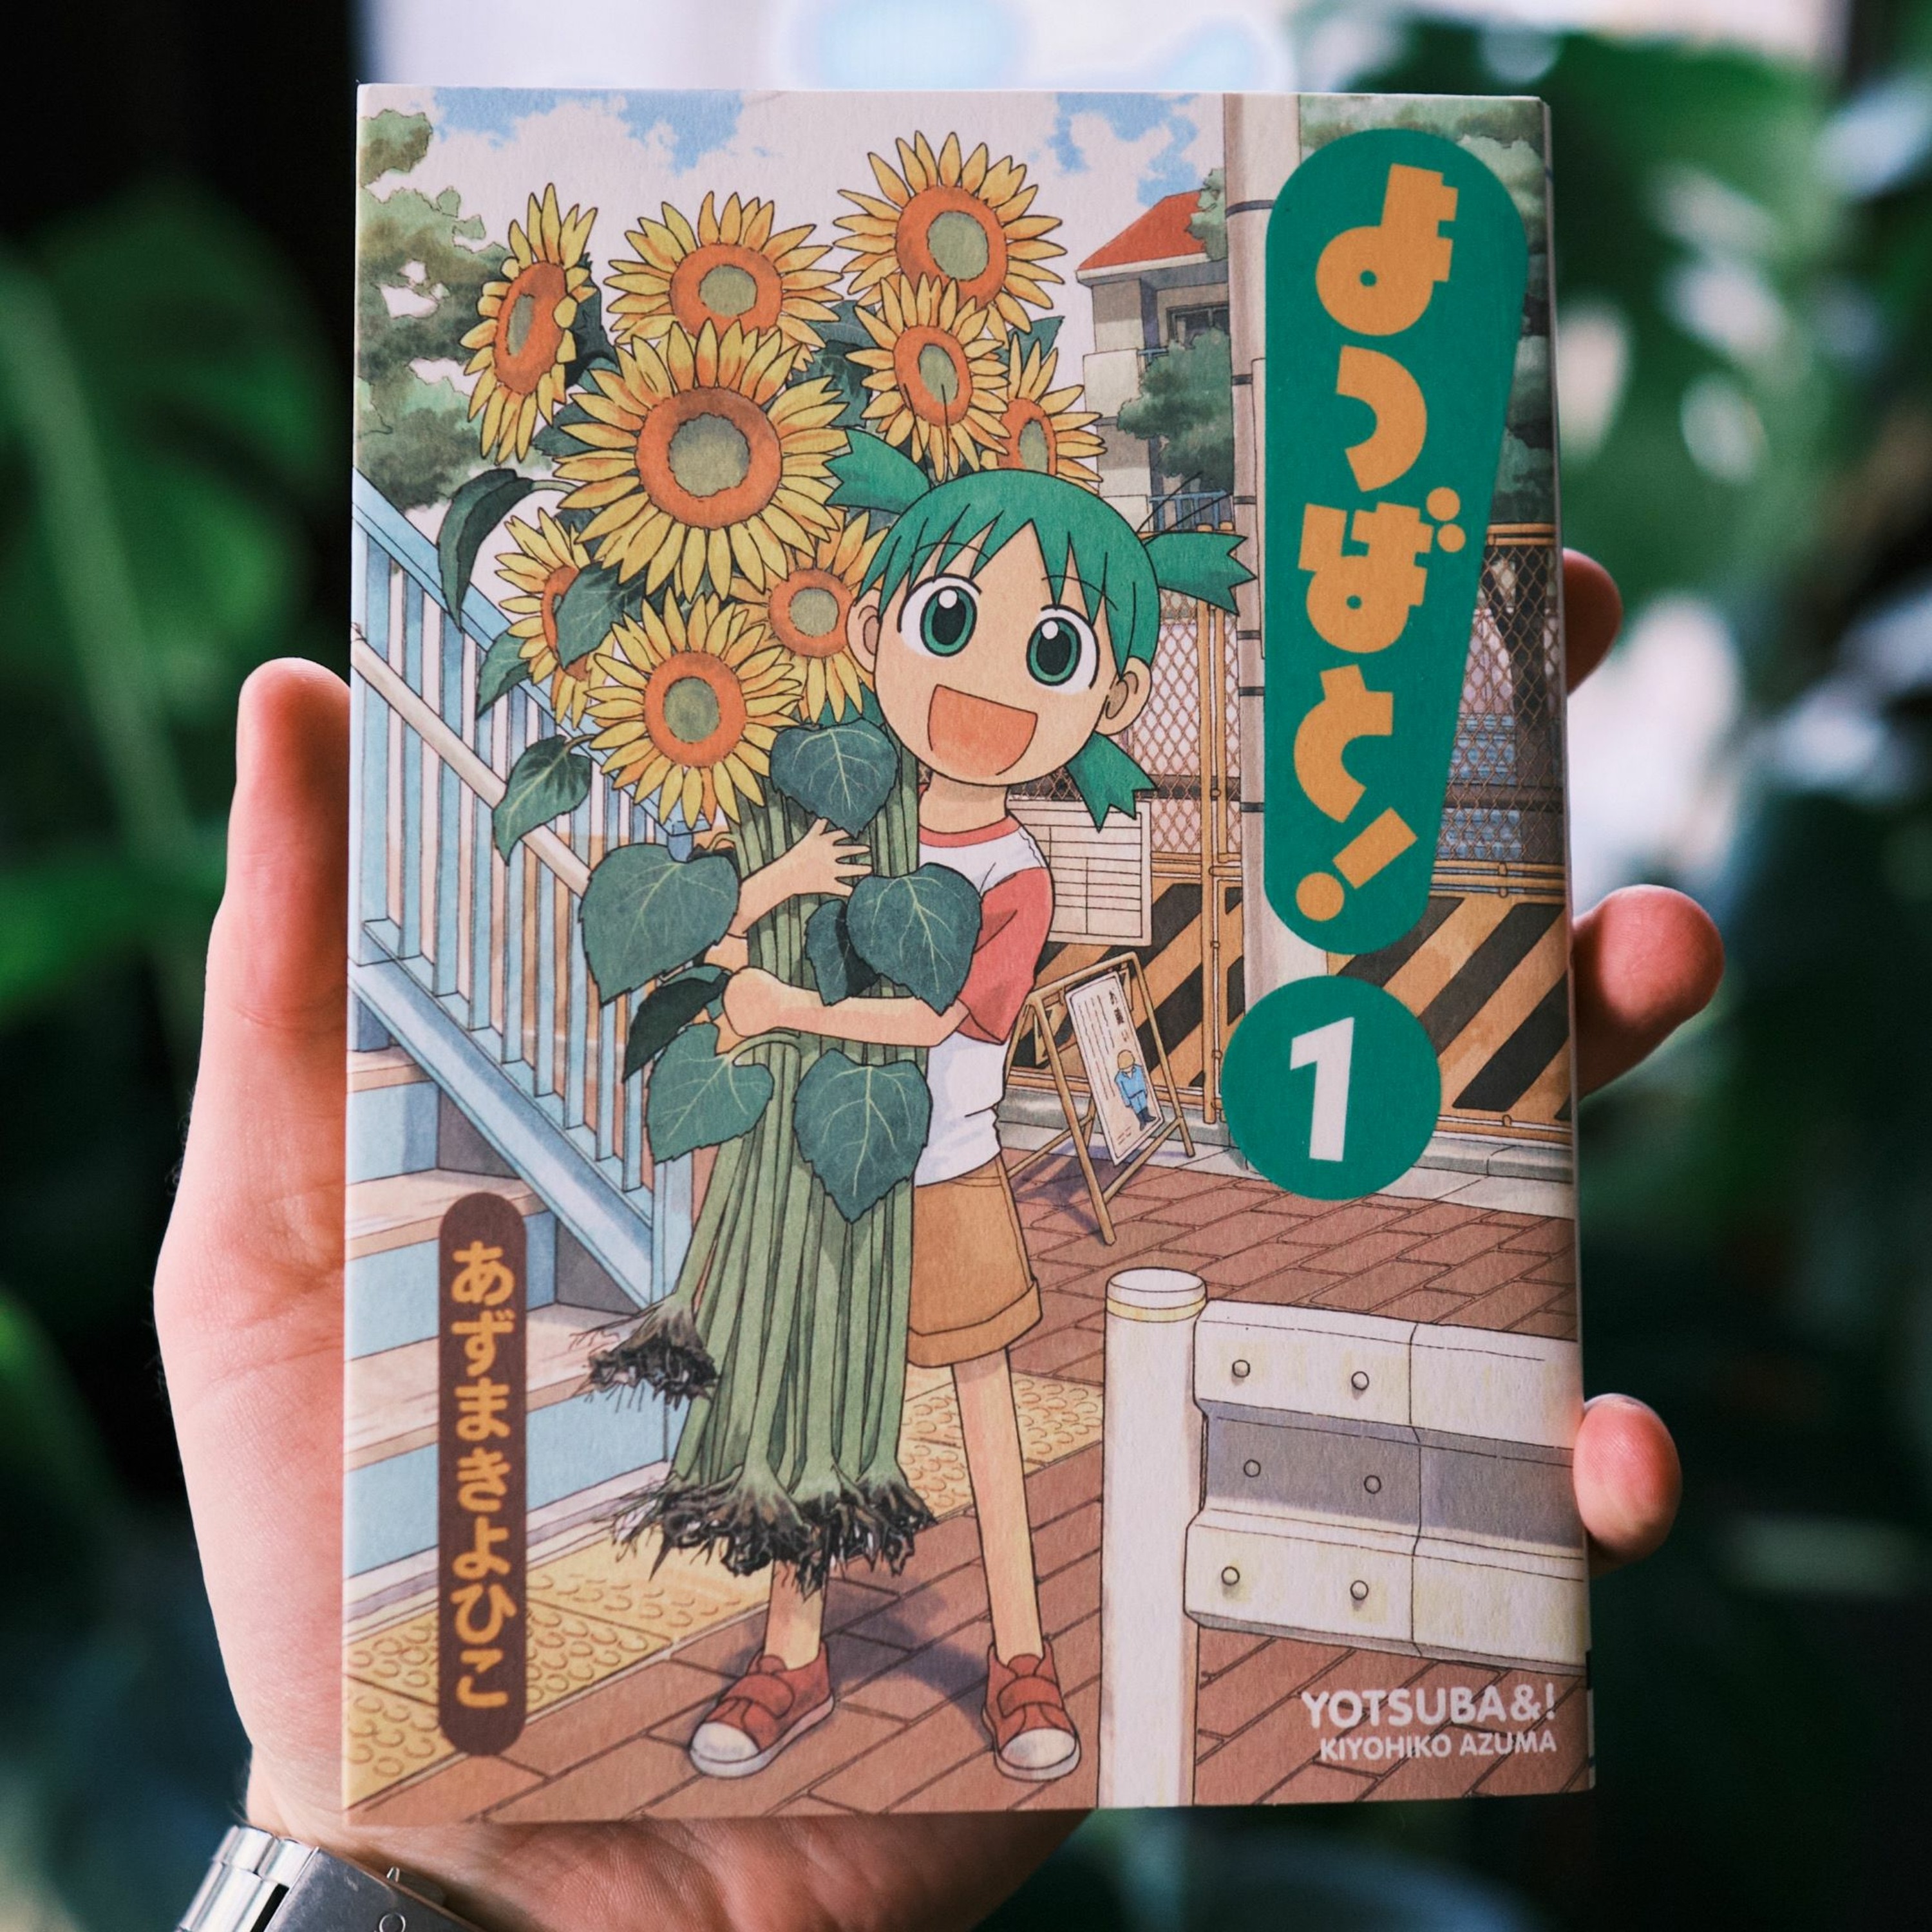 Why Is Everyone Raving about ”Yotsuba&!”?